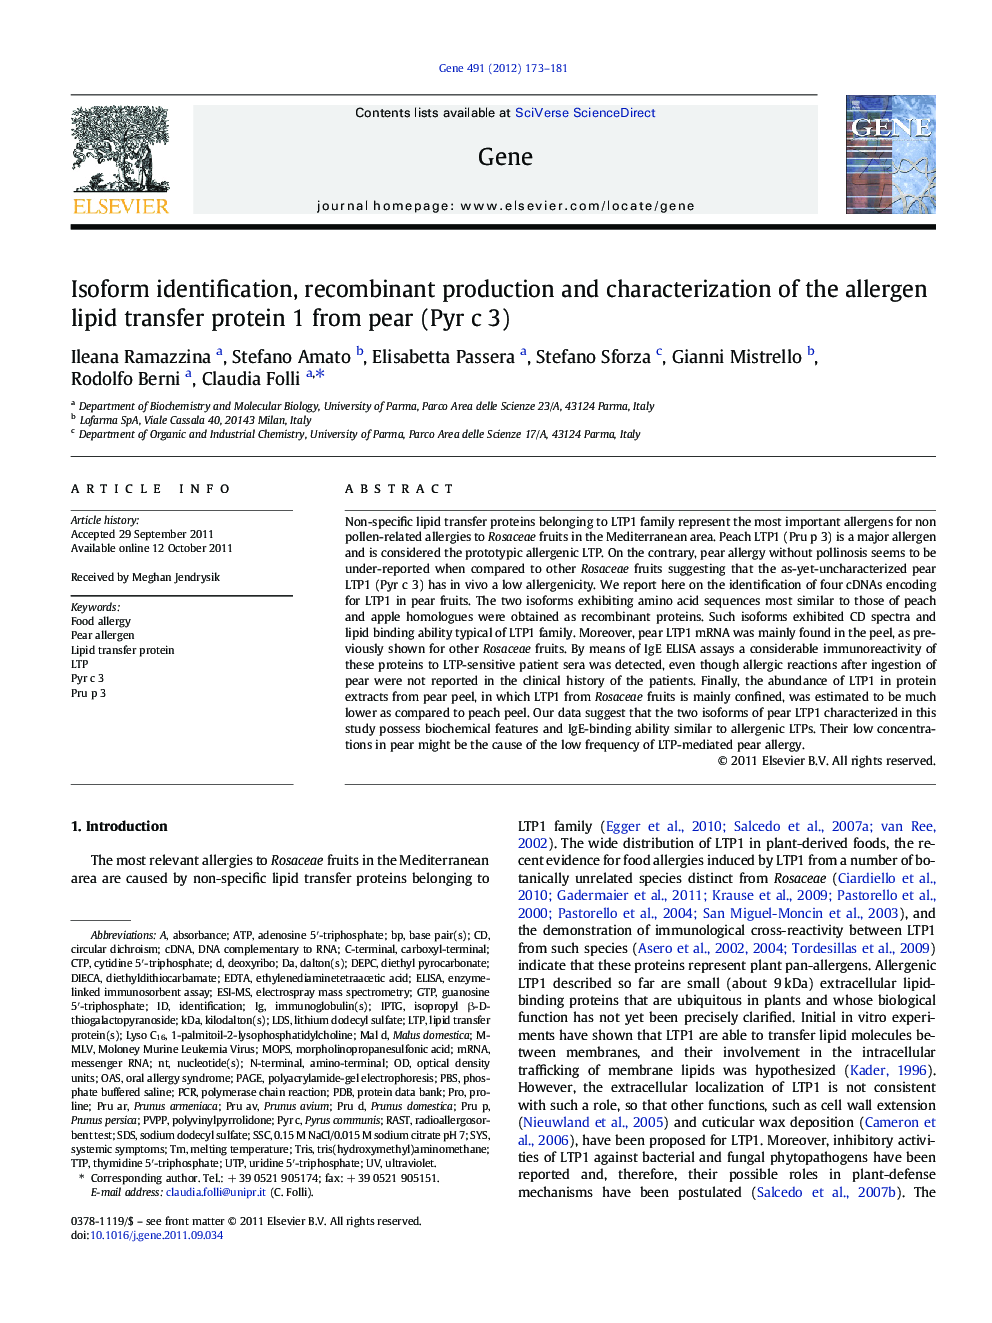 Isoform identification, recombinant production and characterization of the allergen lipid transfer protein 1 from pear (Pyr c 3)